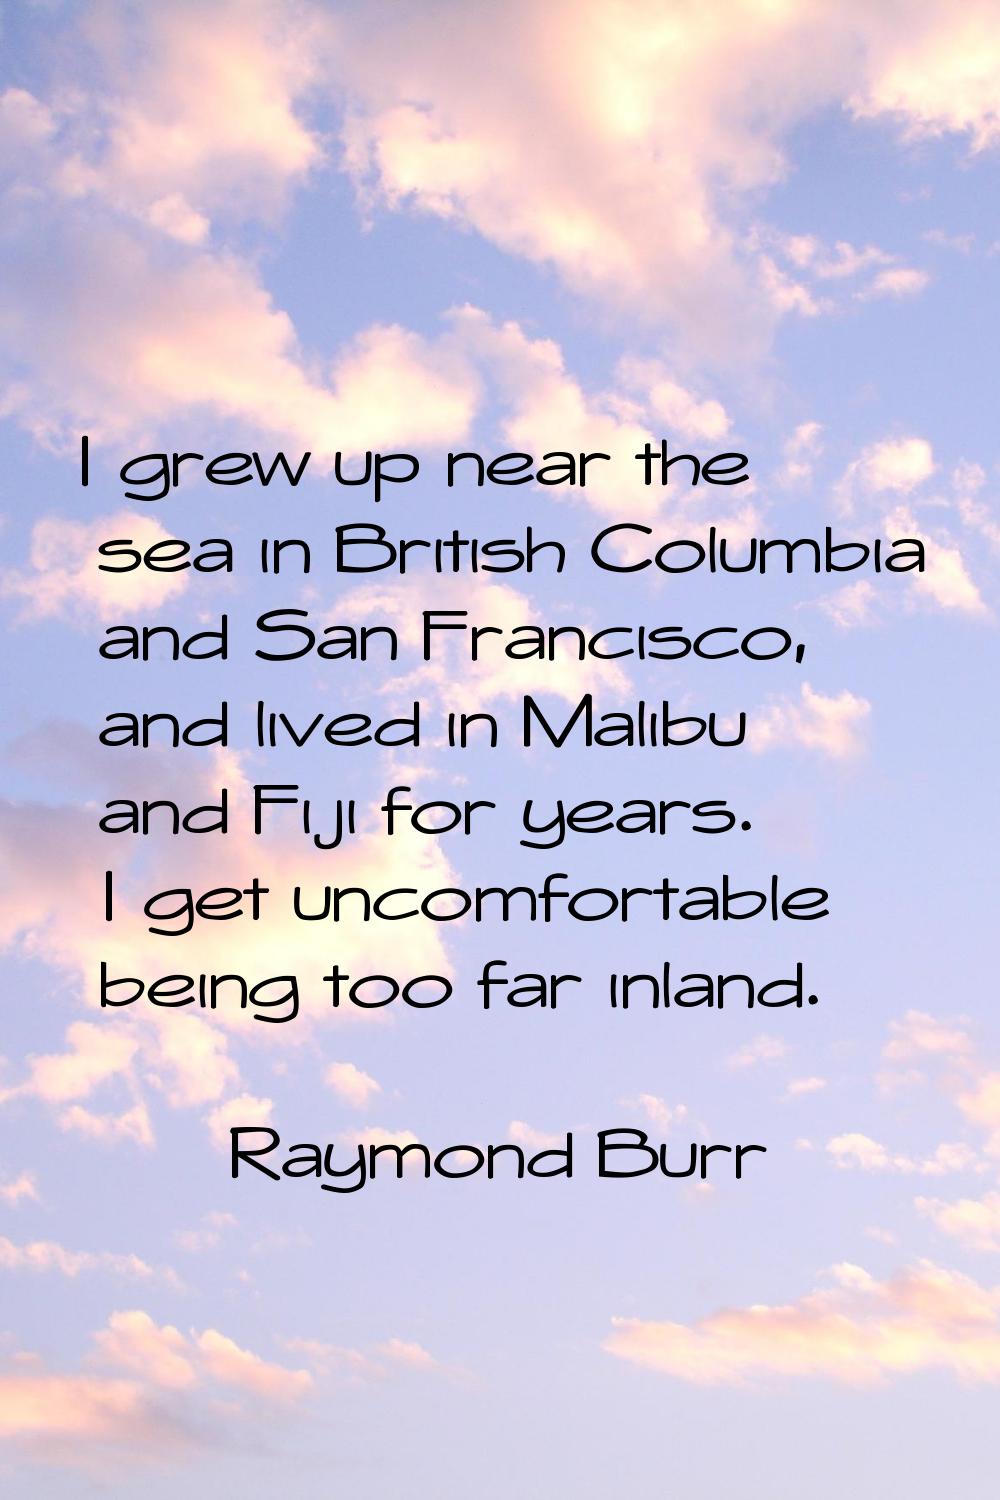 I grew up near the sea in British Columbia and San Francisco, and lived in Malibu and Fiji for year